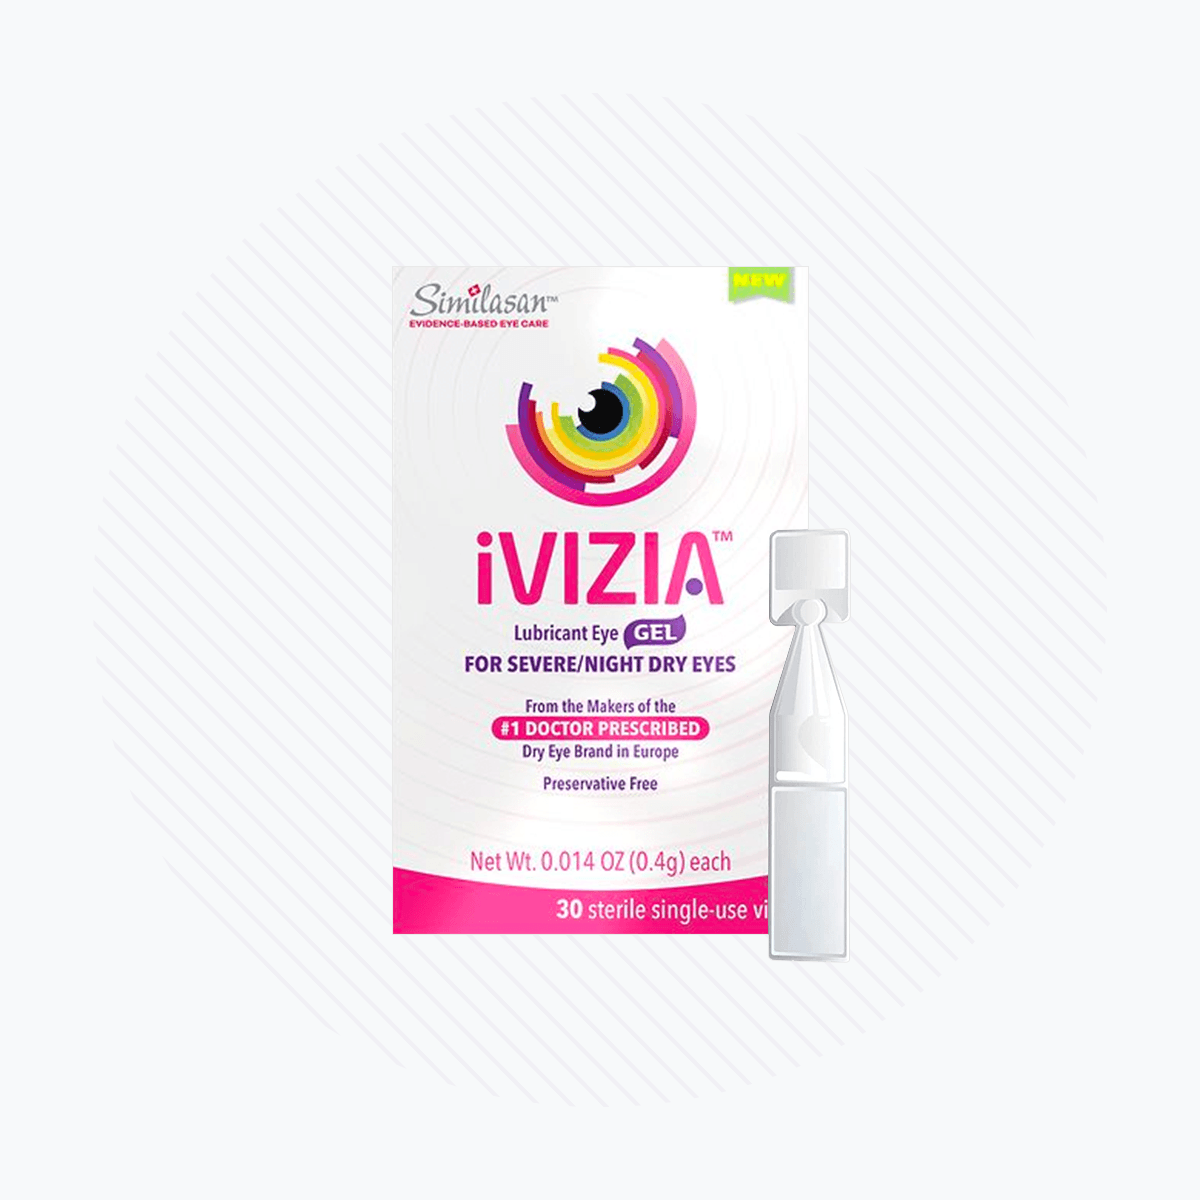 iVIZIA Lubricant Eye Gel for Severe and Nighttime Dry Eye Relief, Preservative-Free, 30 Sterile Single-Use Vials - DryEye Rescue Store